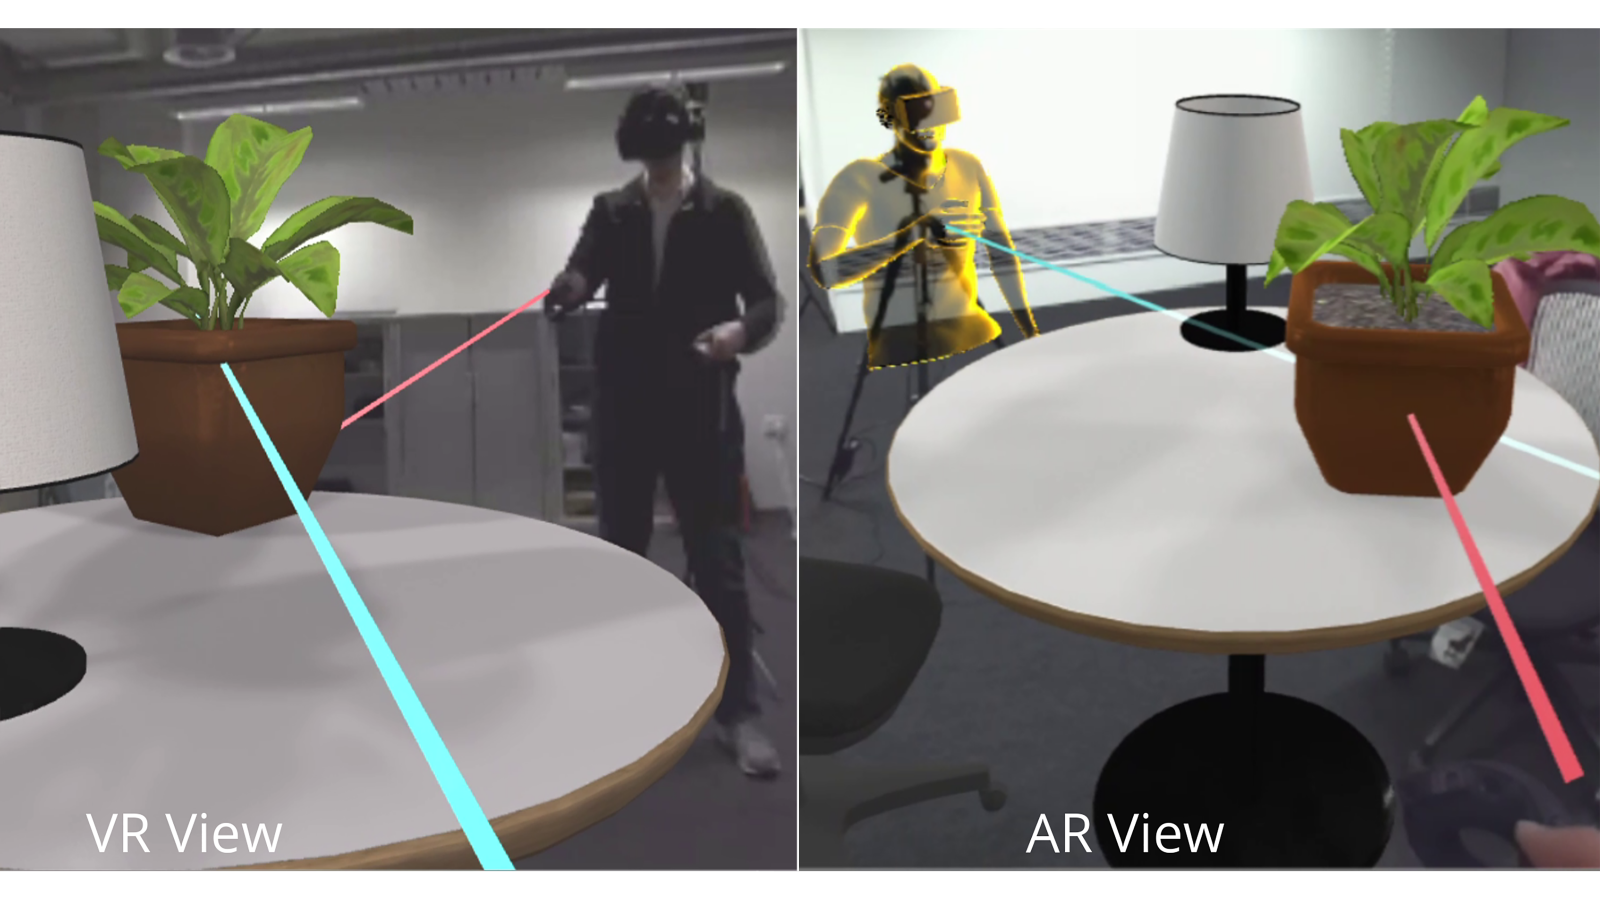 Augmented Virtual Teleportation - an asymmetric platform for remote collaboration. From the left: a remote traveler wearing a VR HMD, the Mixed Reality collaboration space seen in their display, the space shown on an AR display, and the local host.